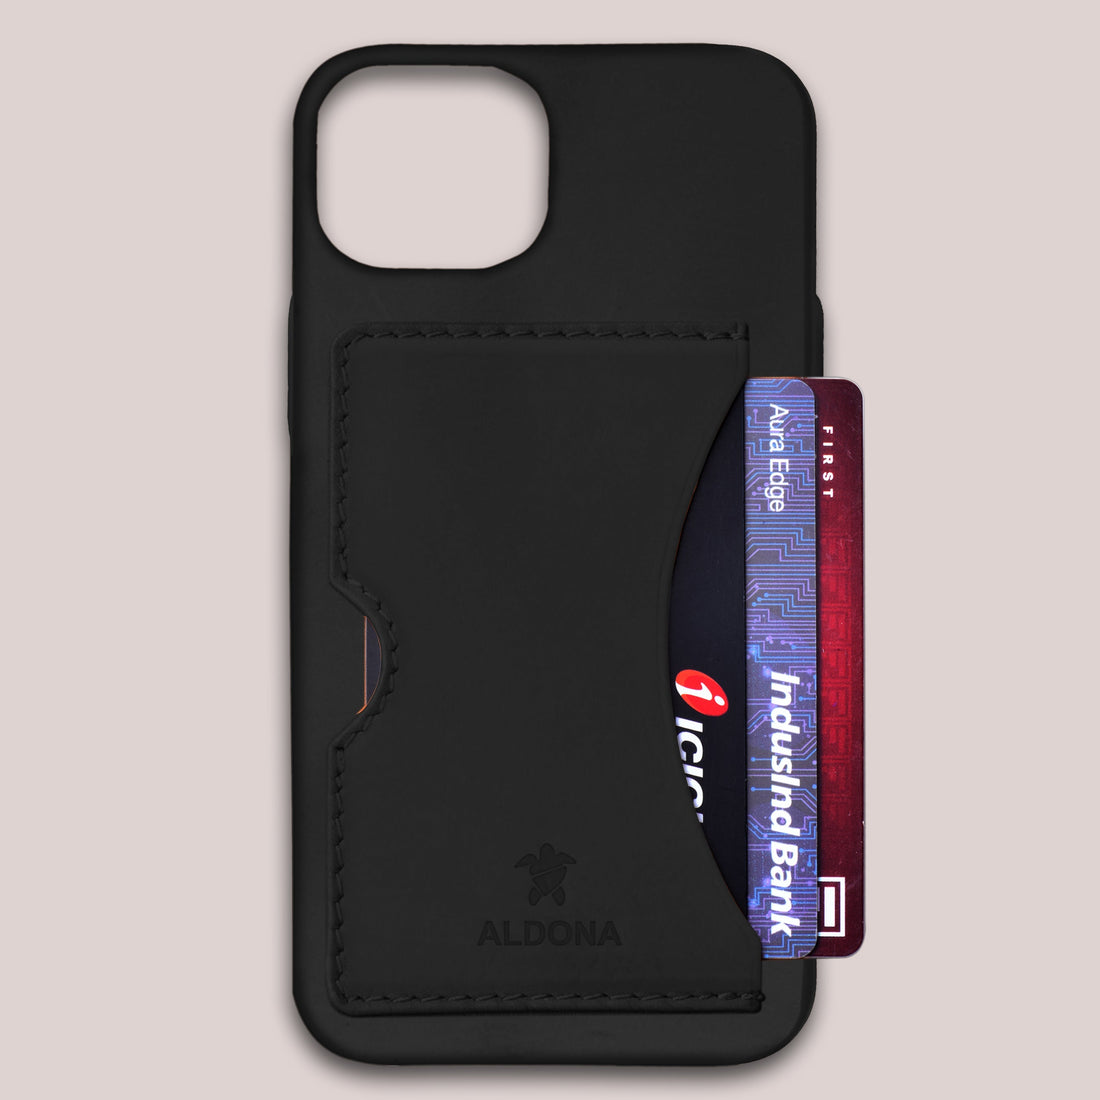 Baxter Card Case for iPhone 12 Series - Burnt Tobacco